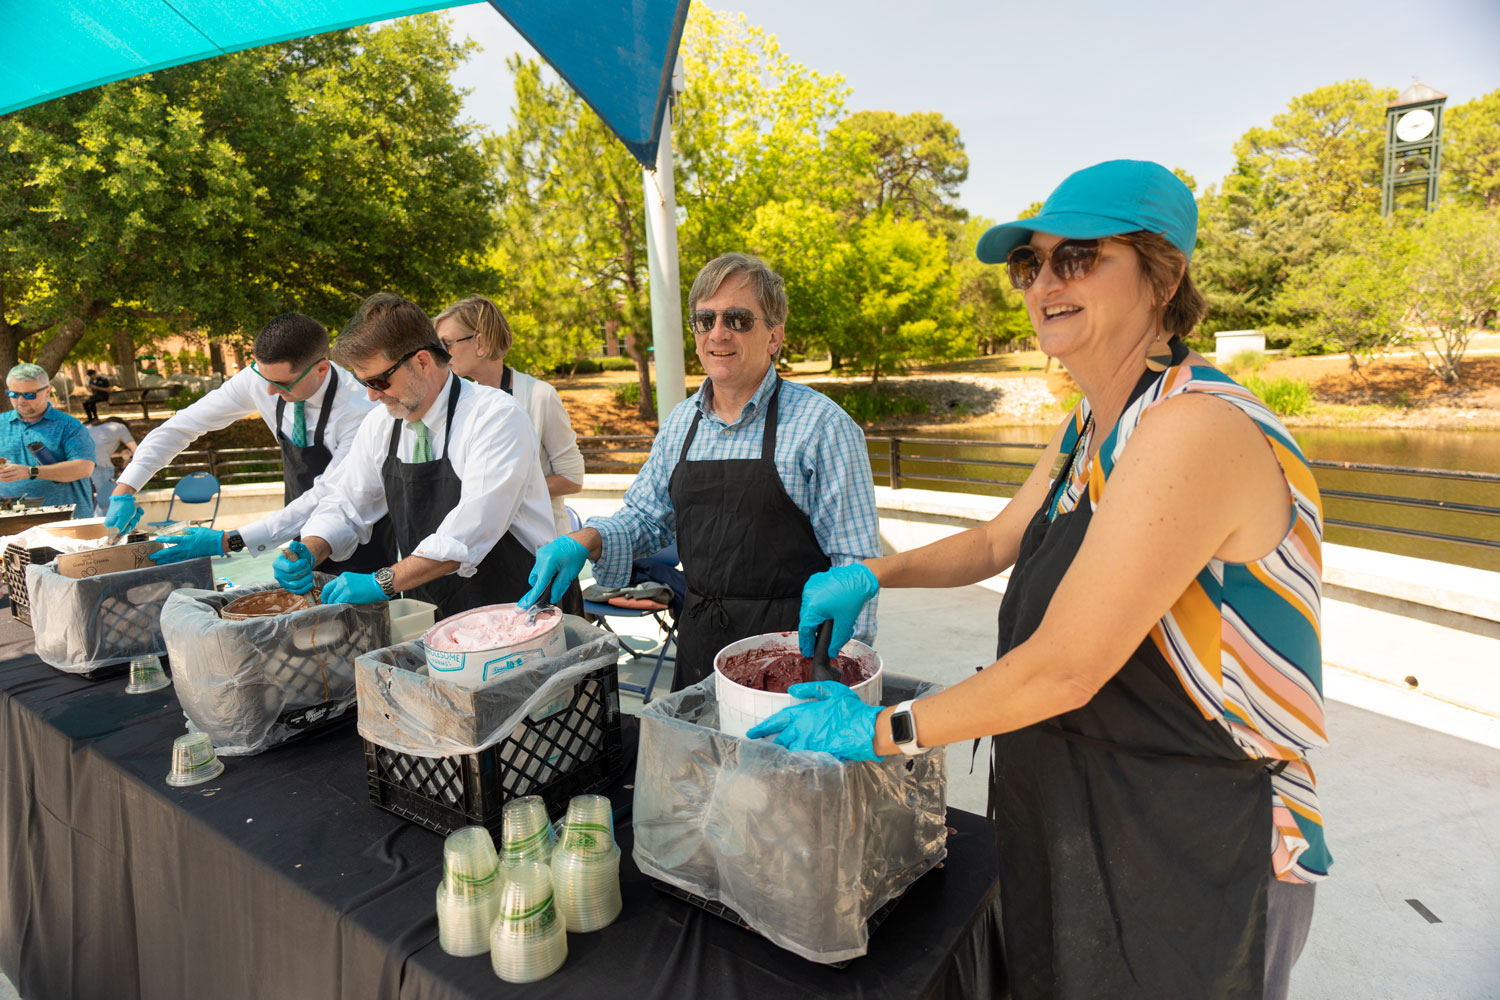 Campus Leaders scoop ice cream for faculty and staff as part of State Employee Appreciation Day